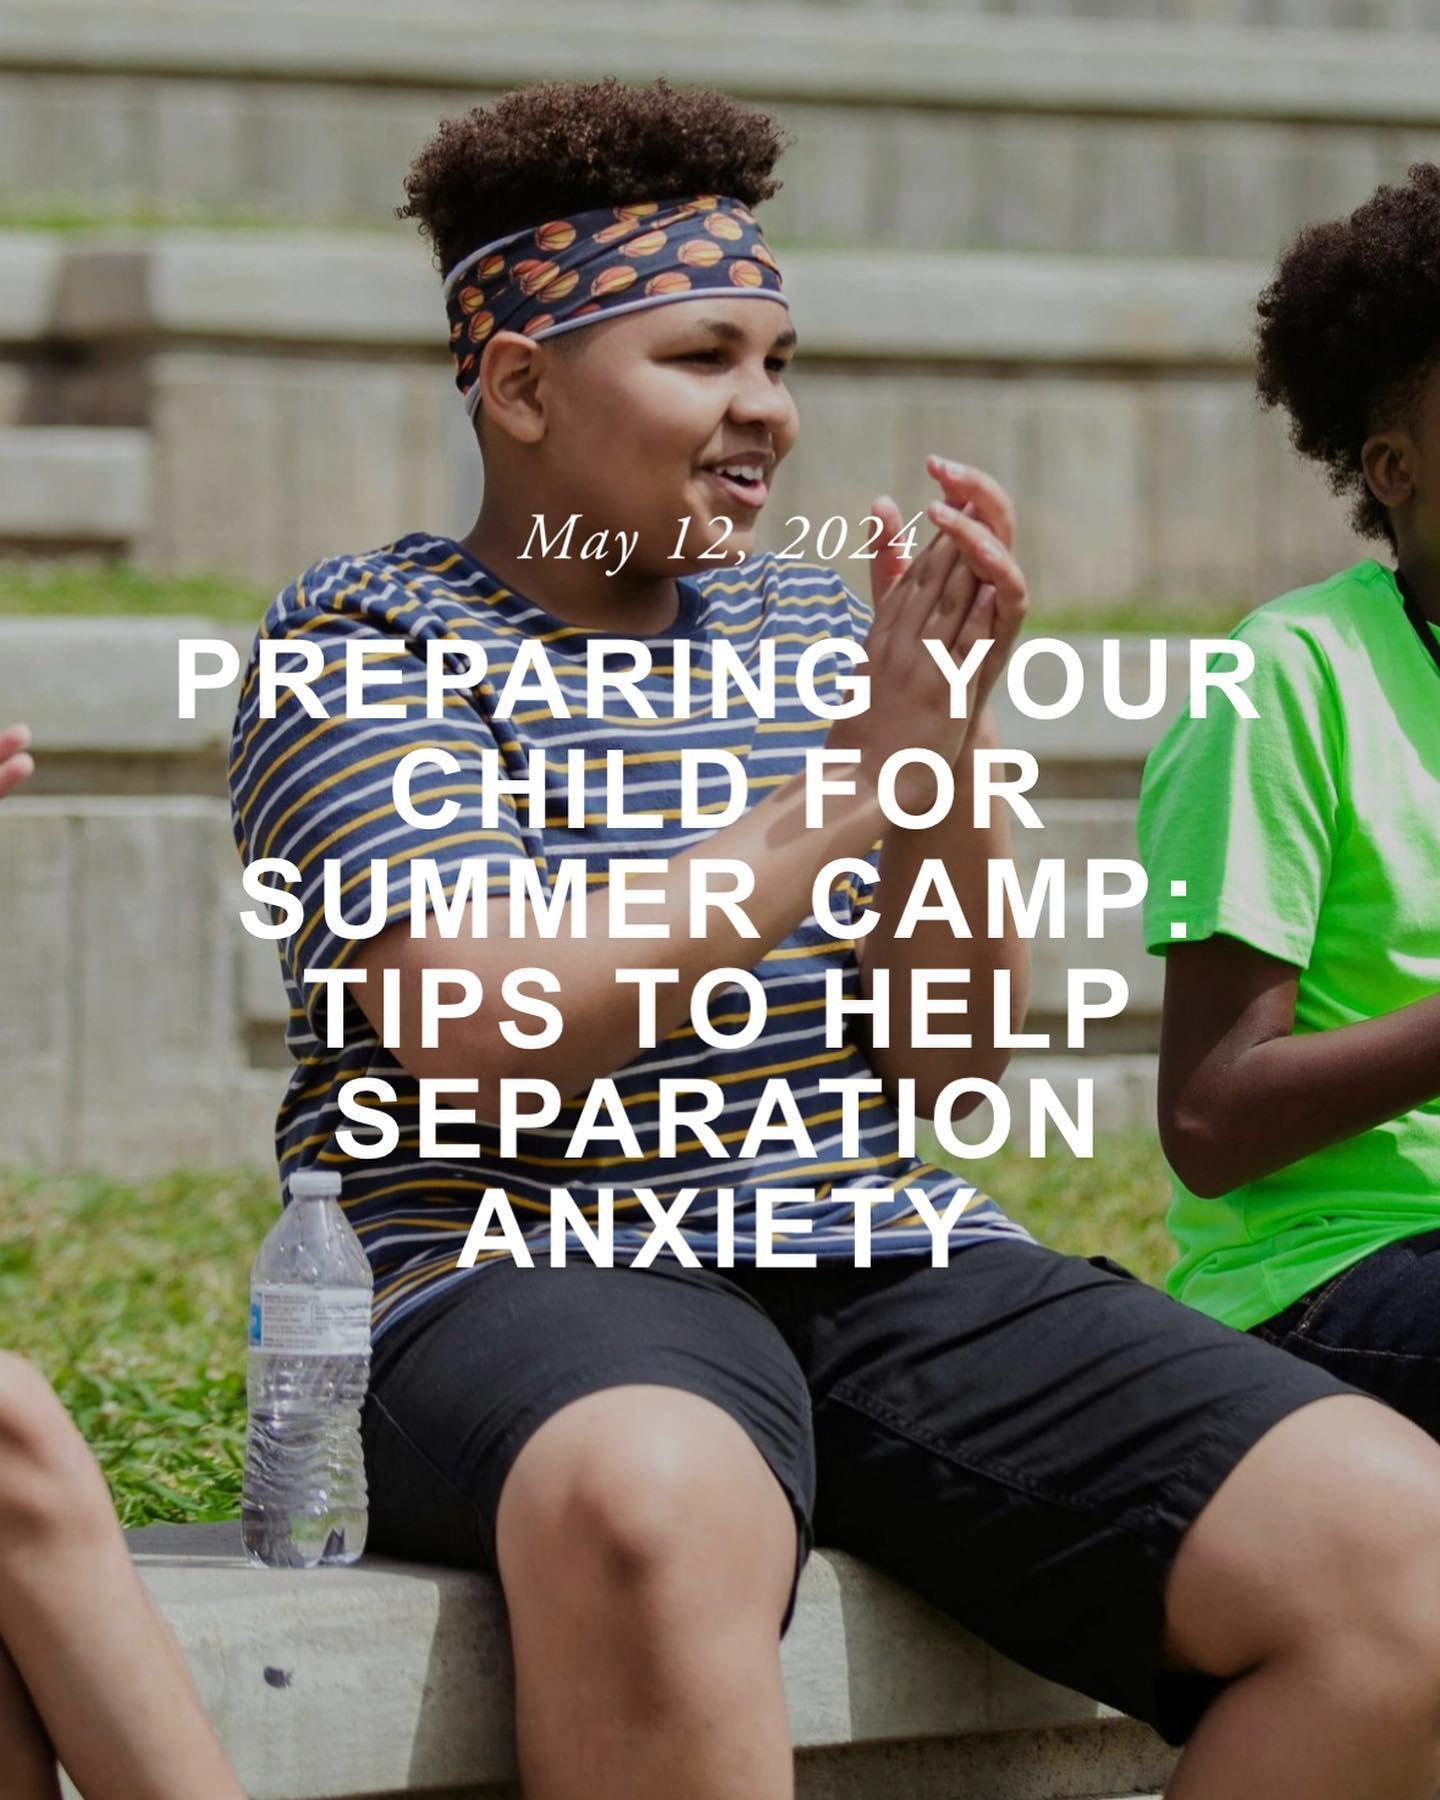 Learn how to prepare for summer camp separation anxiety with this blog by our psychotherapist Rebecca Bischoff, LCSW!

&ldquo;It&rsquo;s almost that time of year again, summer camp is around the corner. This brings up mixed emotions for kids, parents